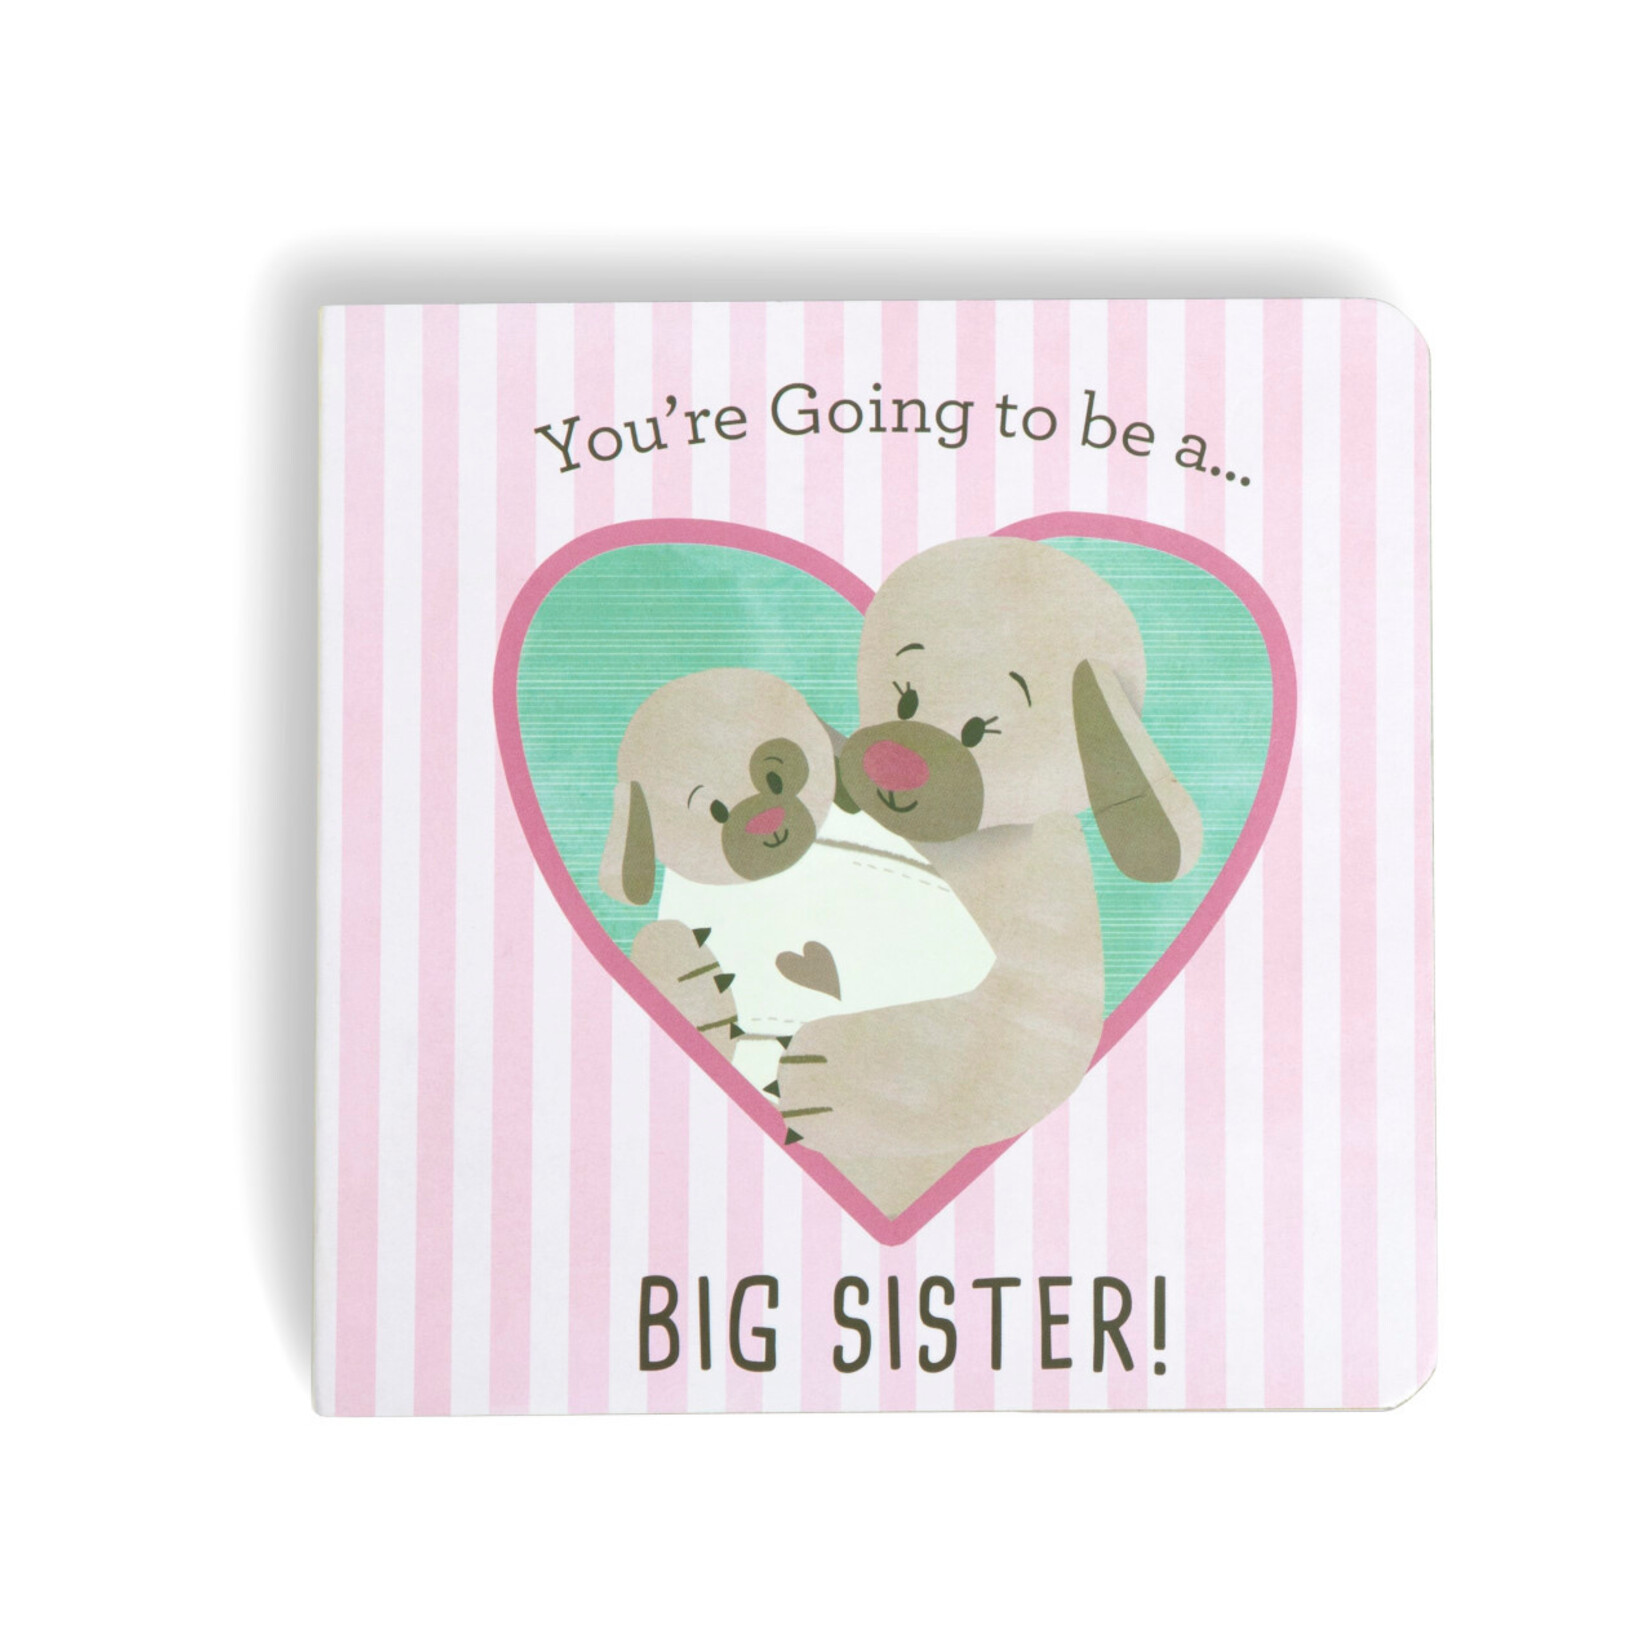 Demdaco Demdaco - You're Going To Be a Big Sister Book